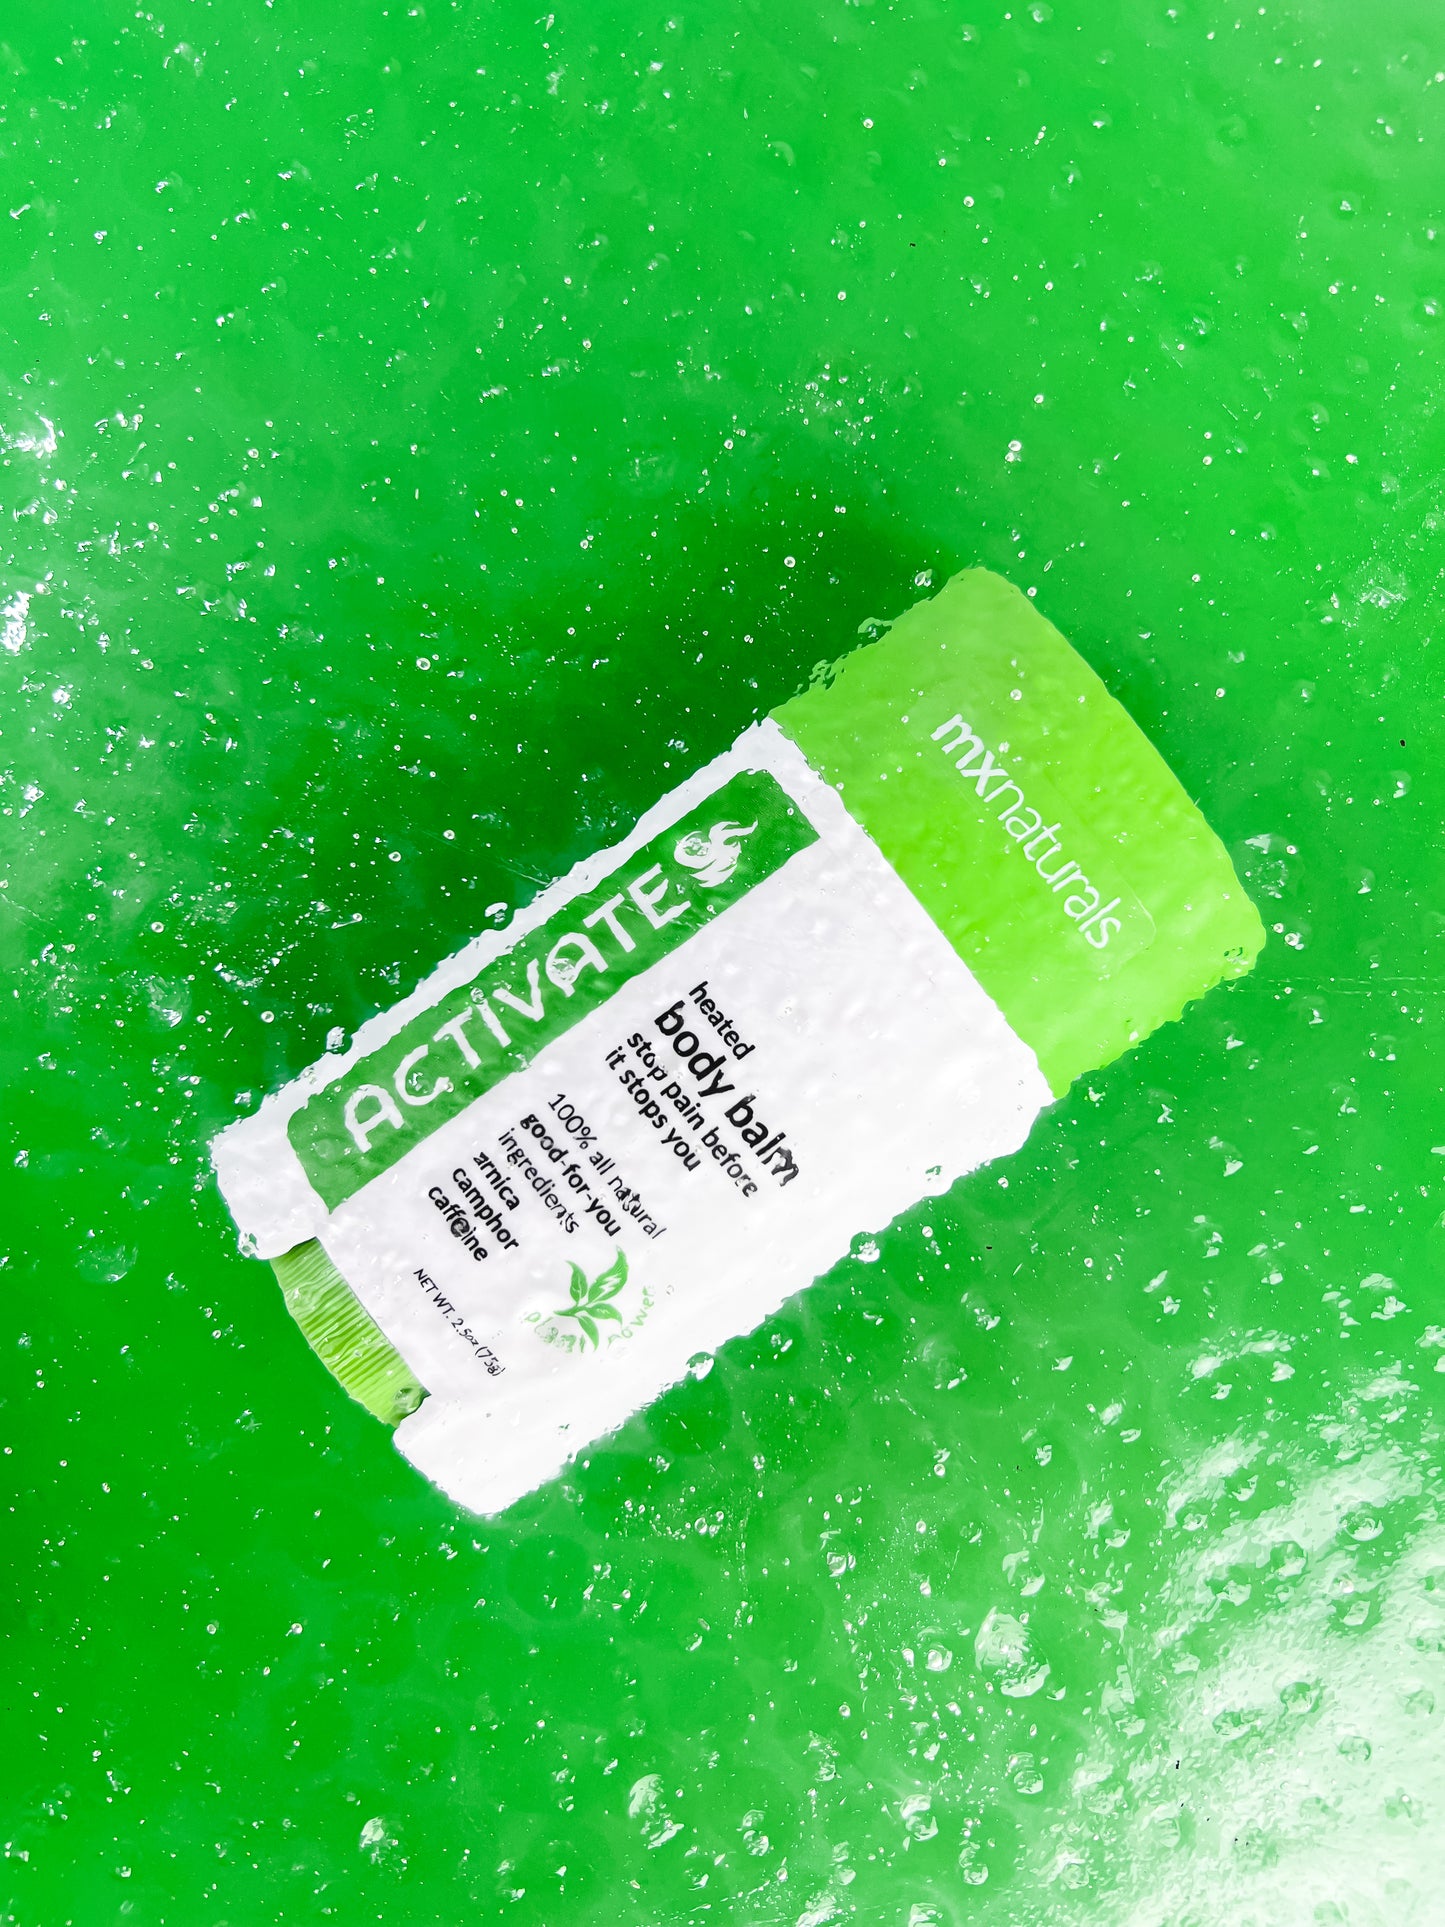 a white and green product titled "activate heated body care balm"  is submerged under hot, sweating water to represent the heat of the product on a green background..